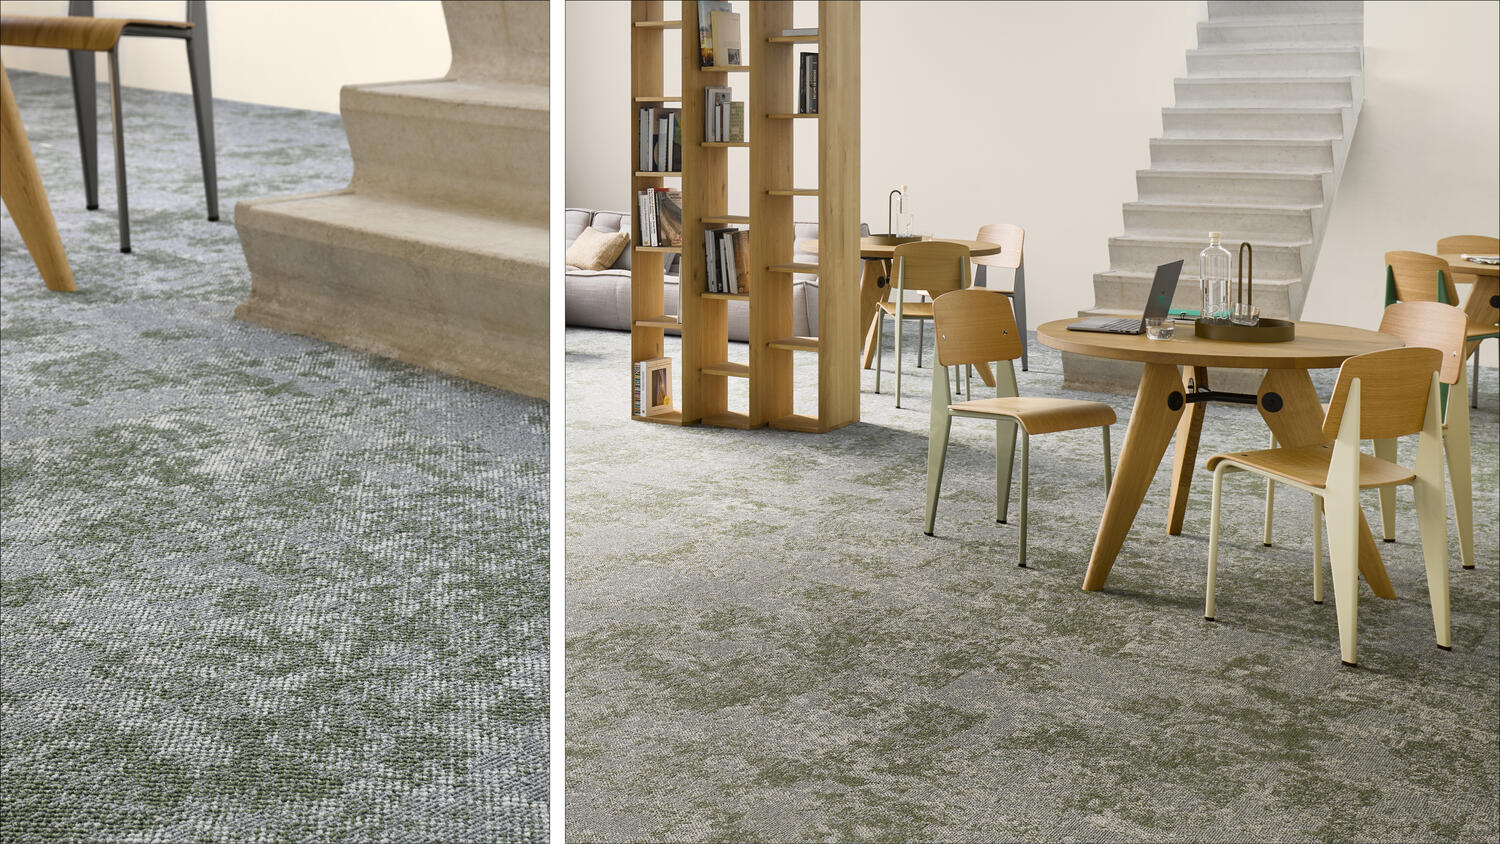 two images of natured inspired commercial carpet tiles for interior spaces